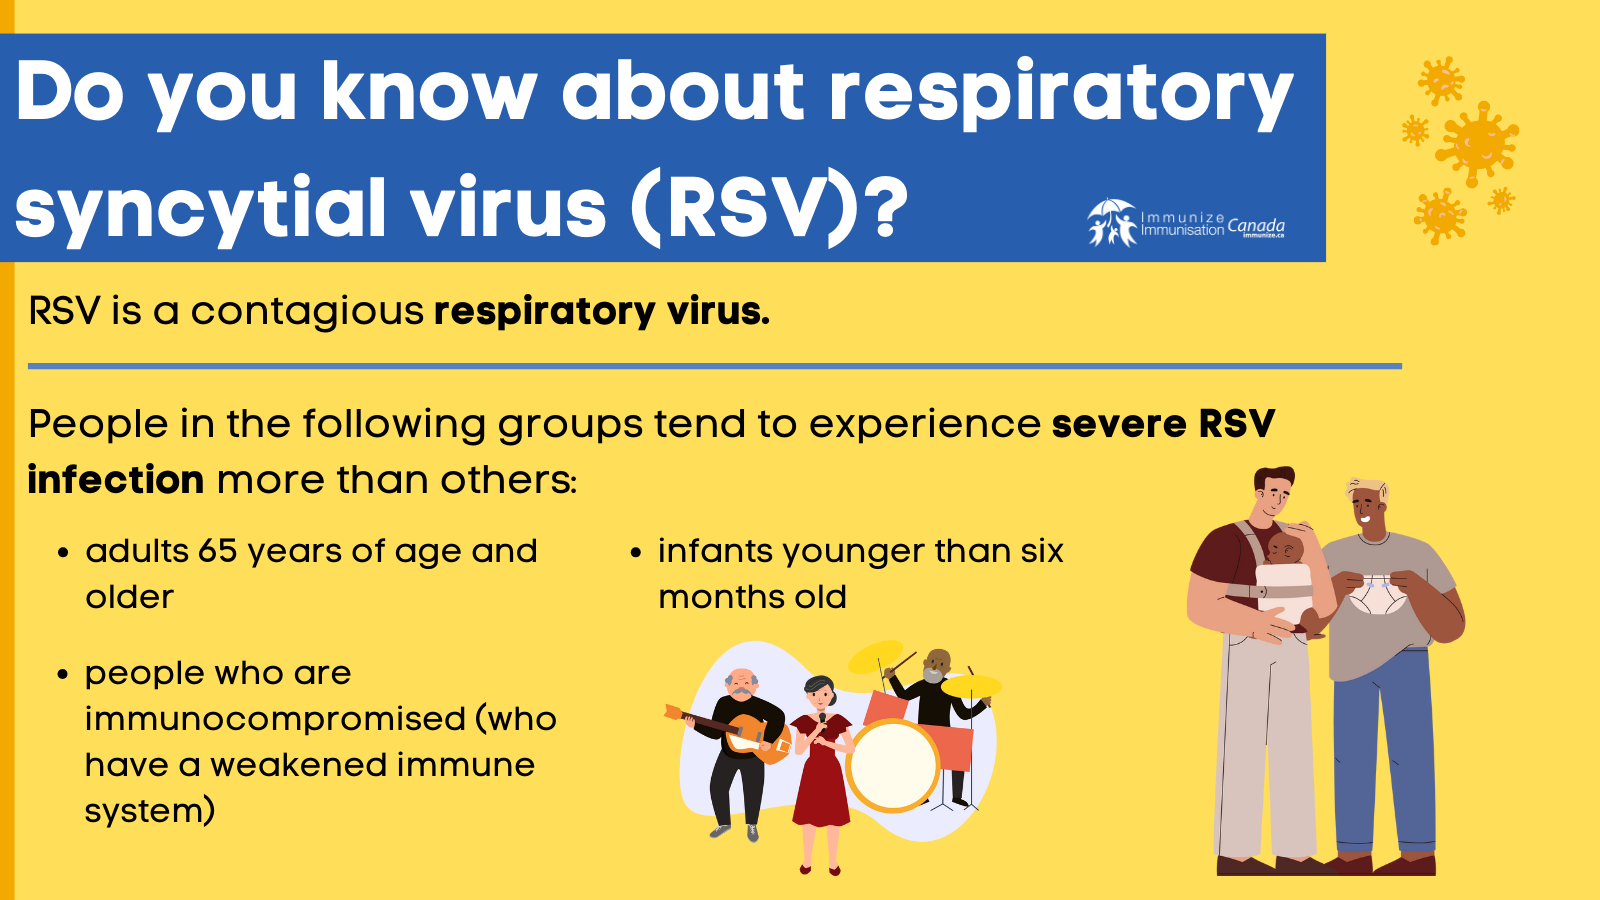 ​Do you know about respiratory syncytial virus (RSV)? - image 3 for Twitter